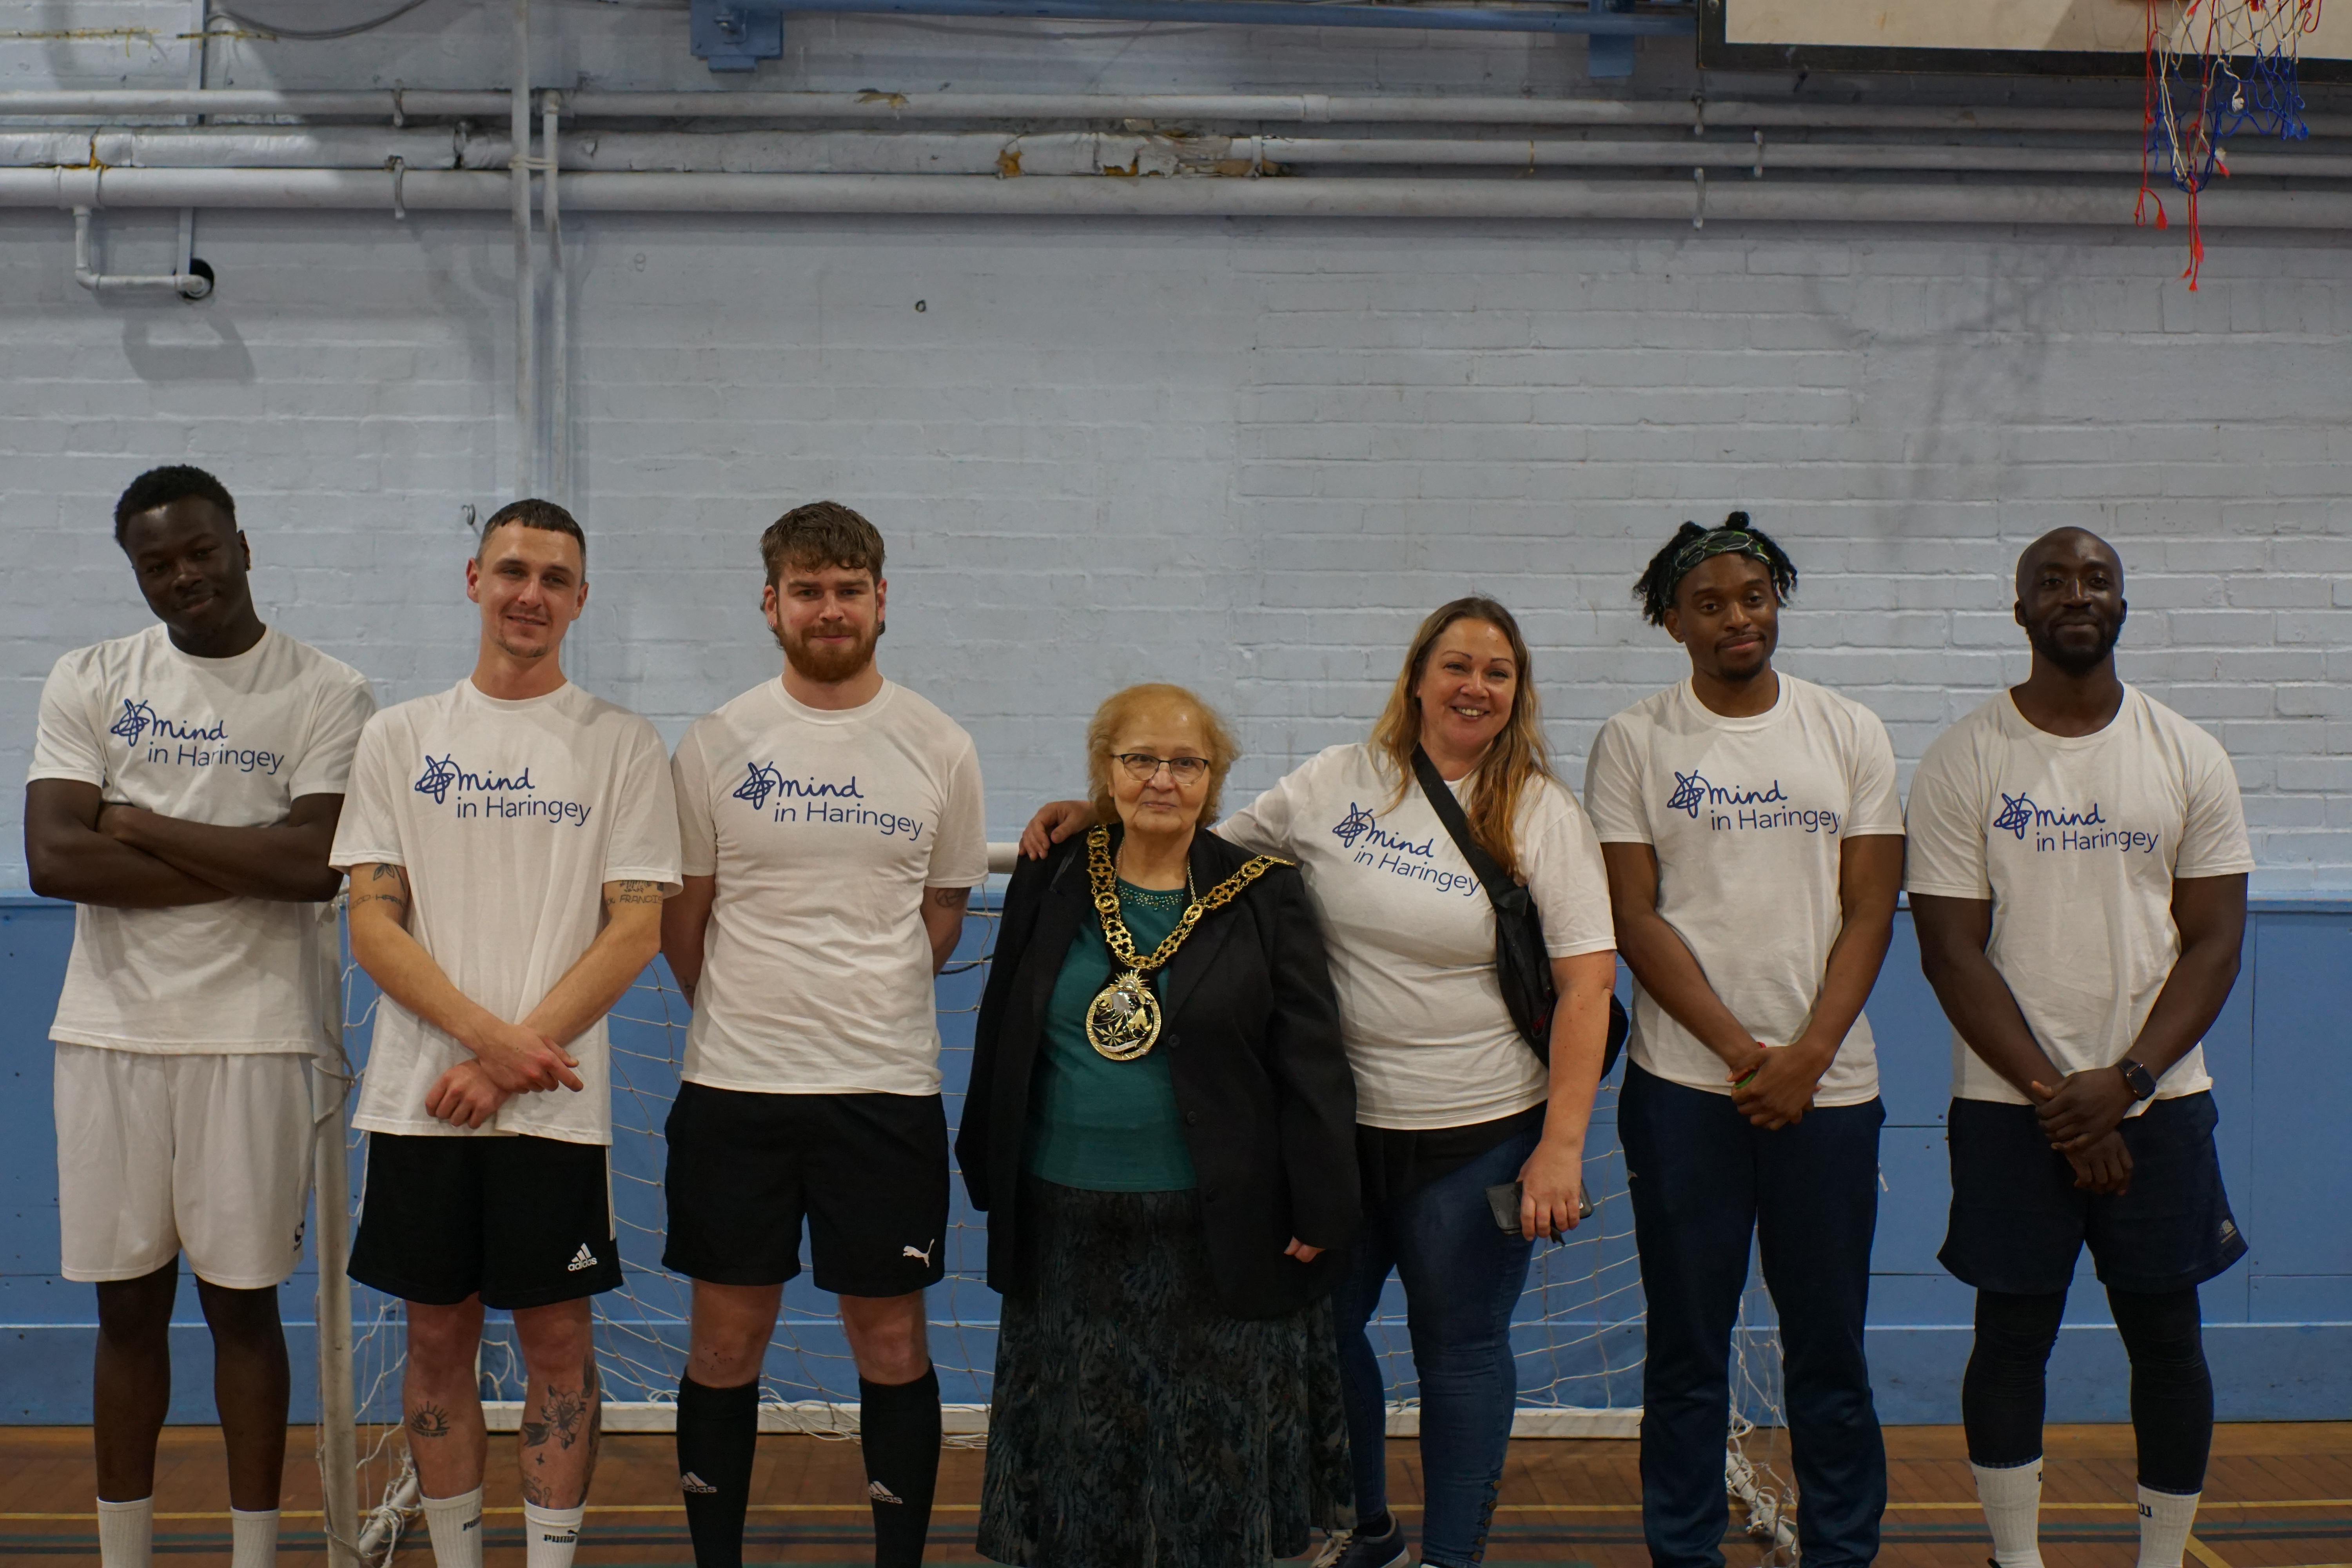 Mayor of Haringey Cllr Gina Adamou with the Mind in Haringey team